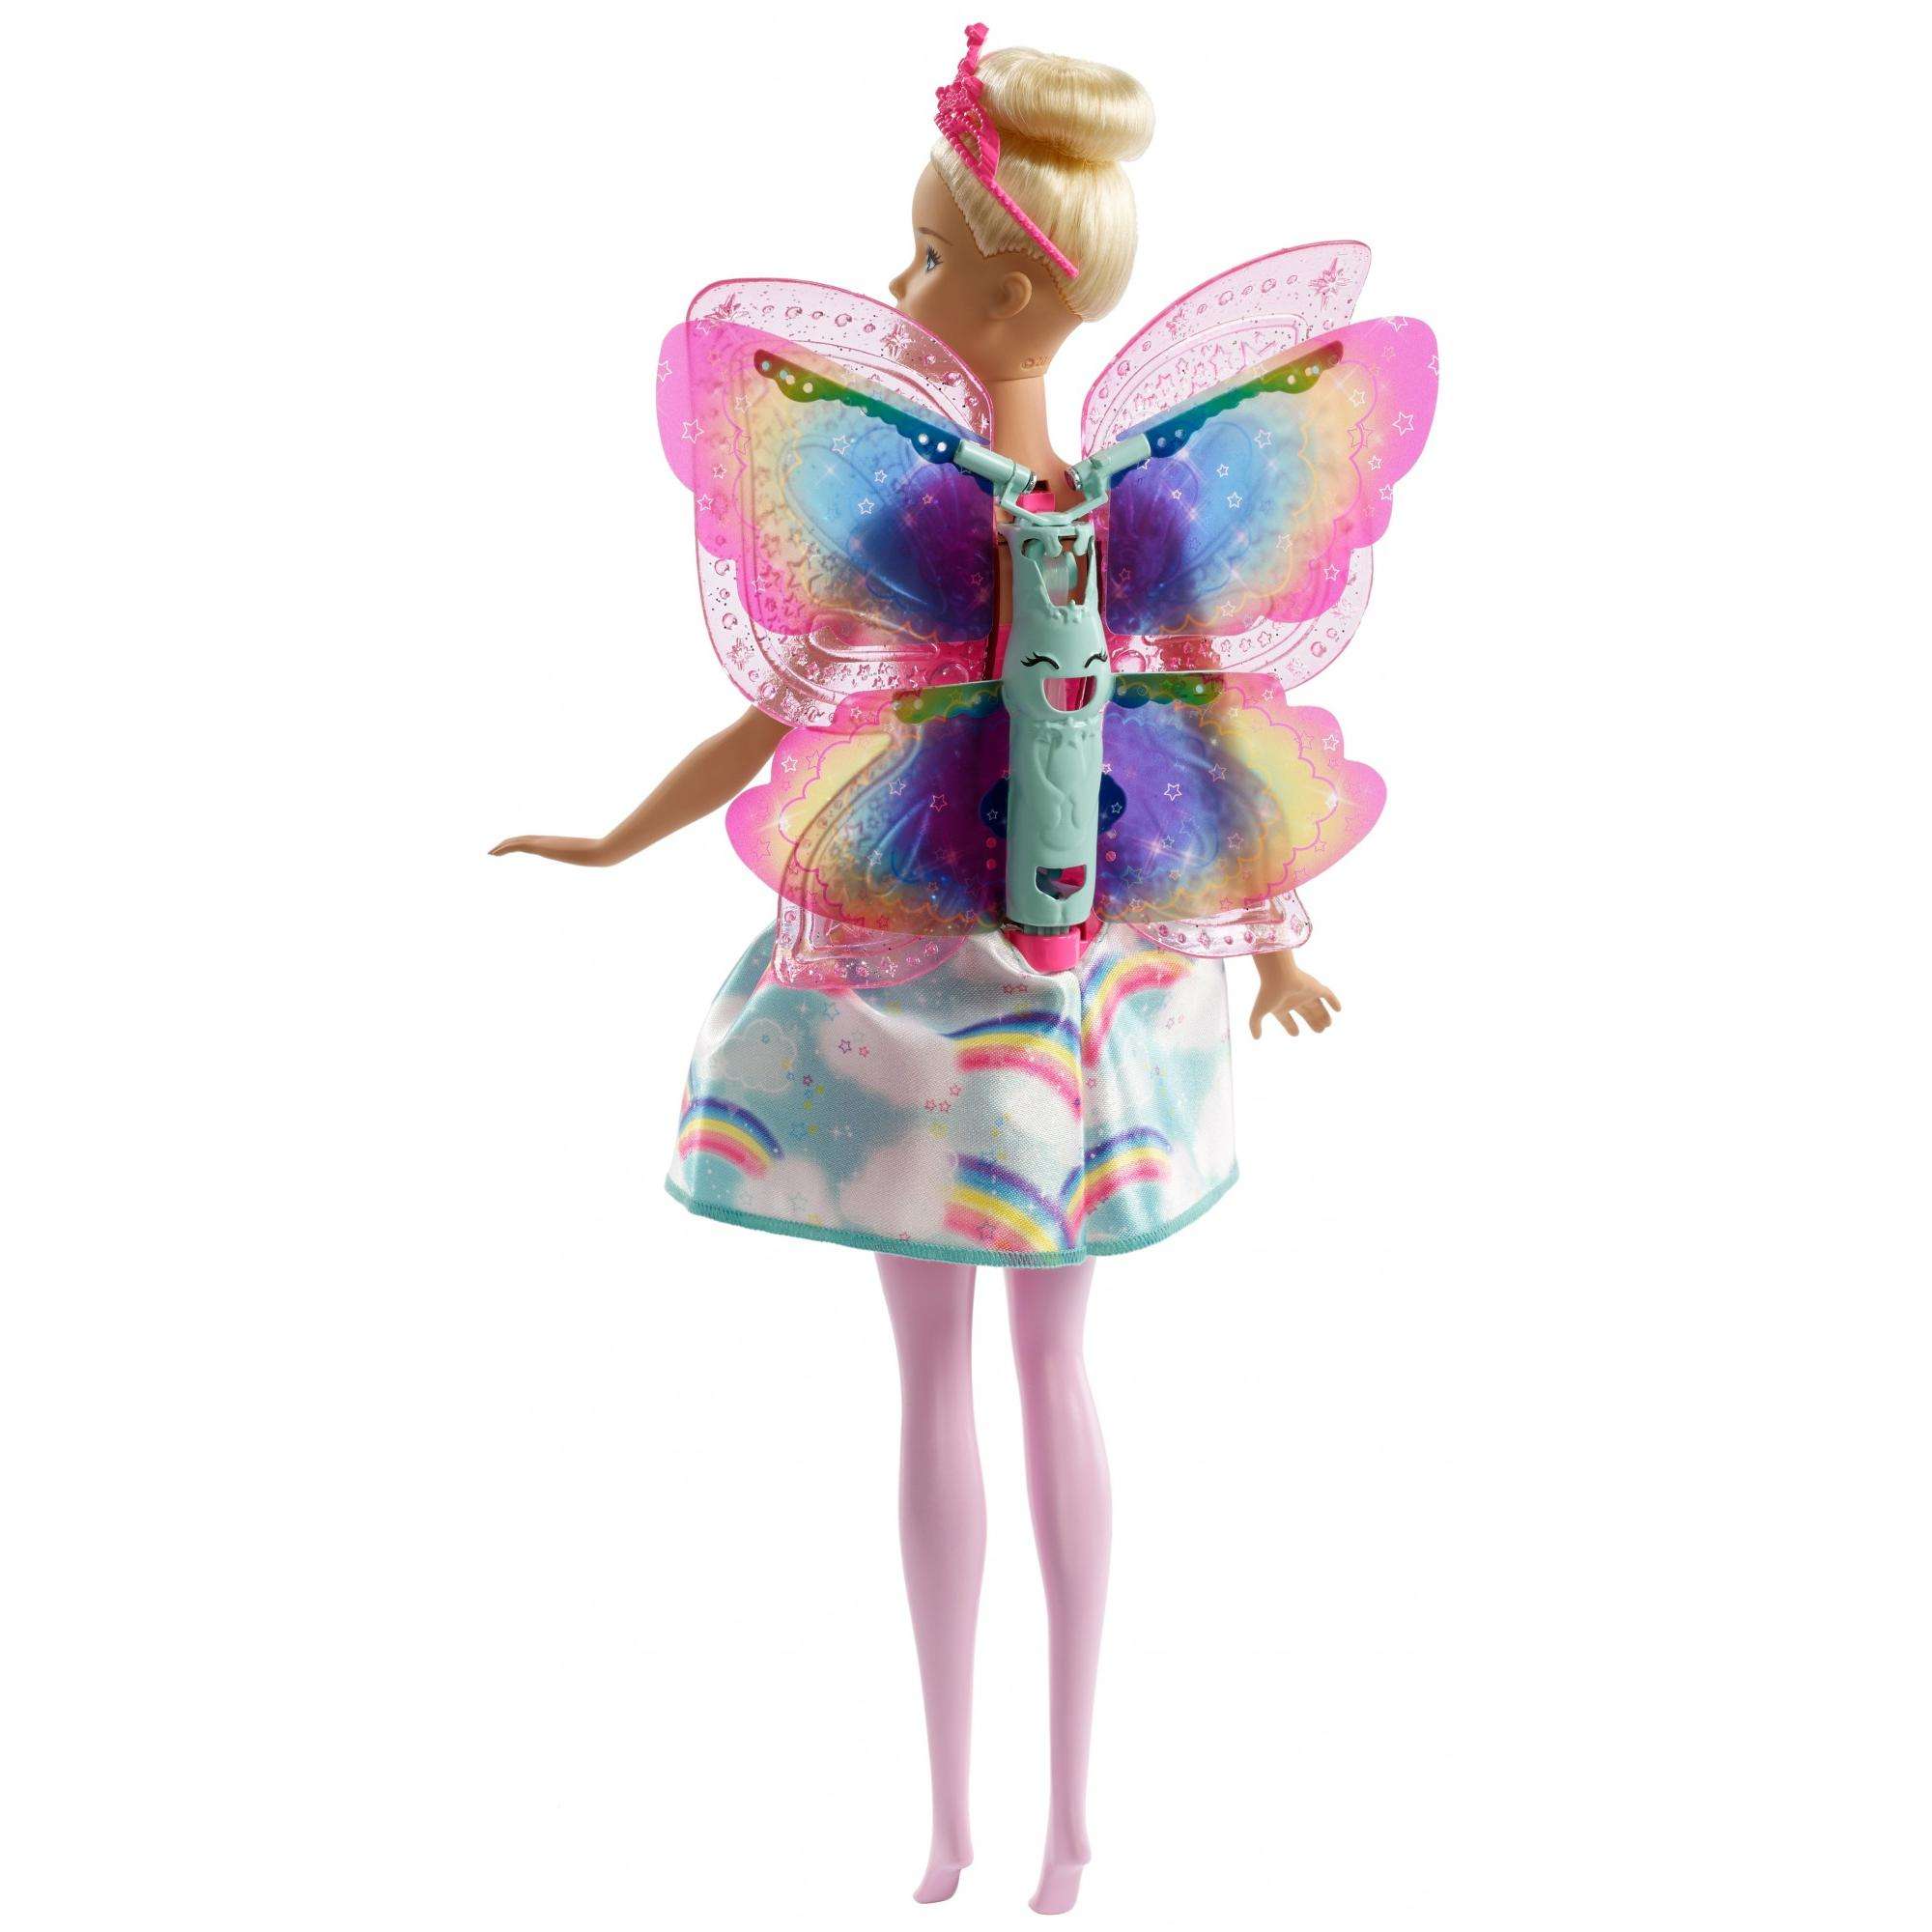 Barbie Dreamtopia Flying Wings Fairy Doll with Blonde Hair - image 10 of 11